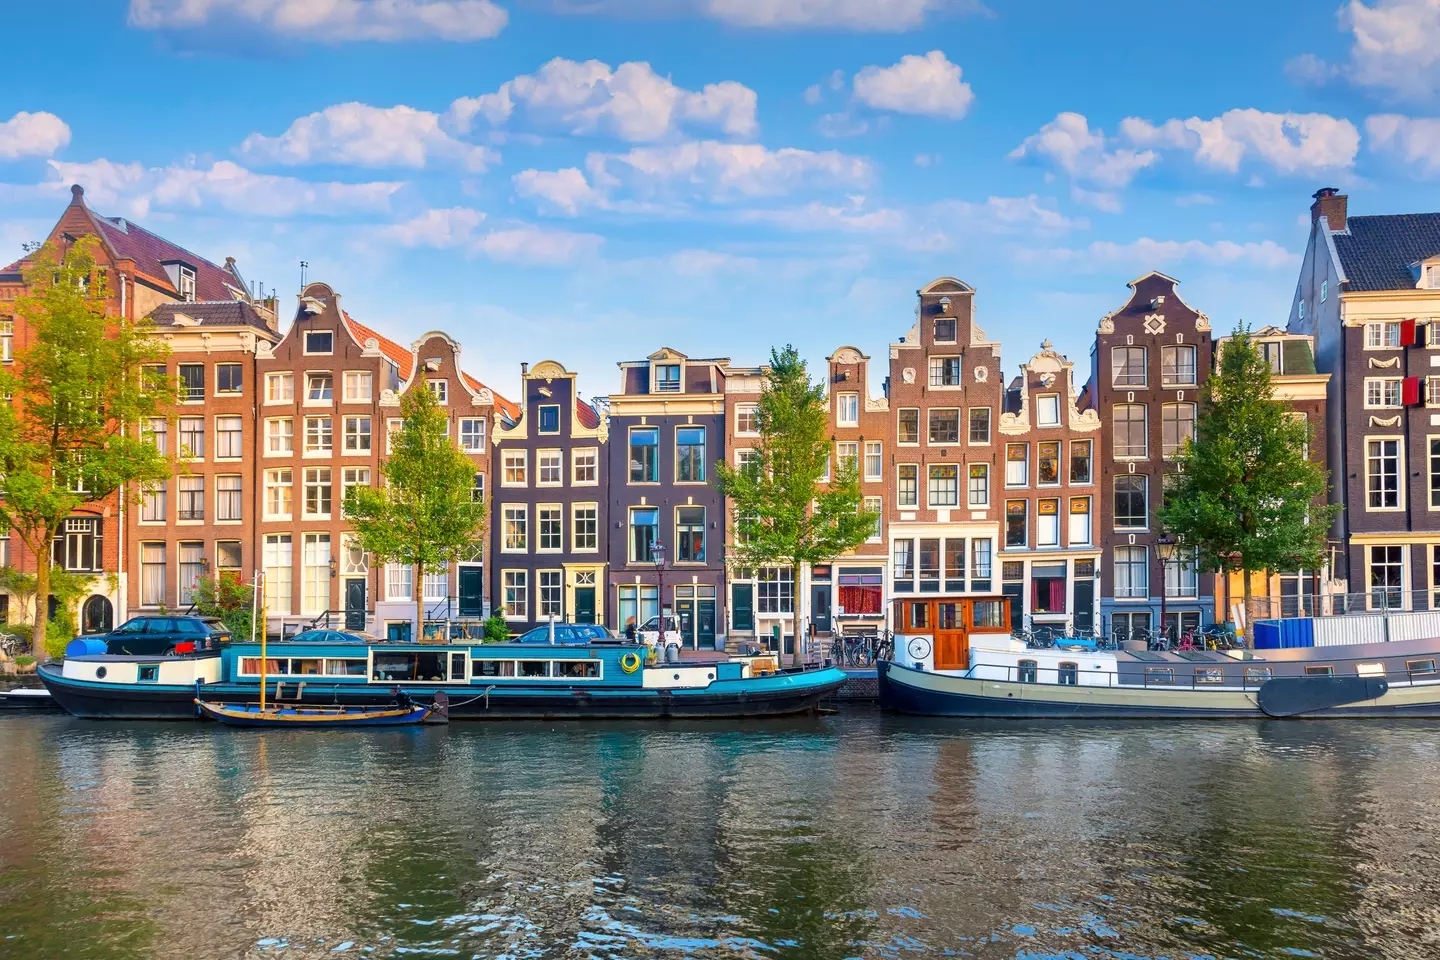 Amsterdam is upping it's tourism tax to 12.5%.